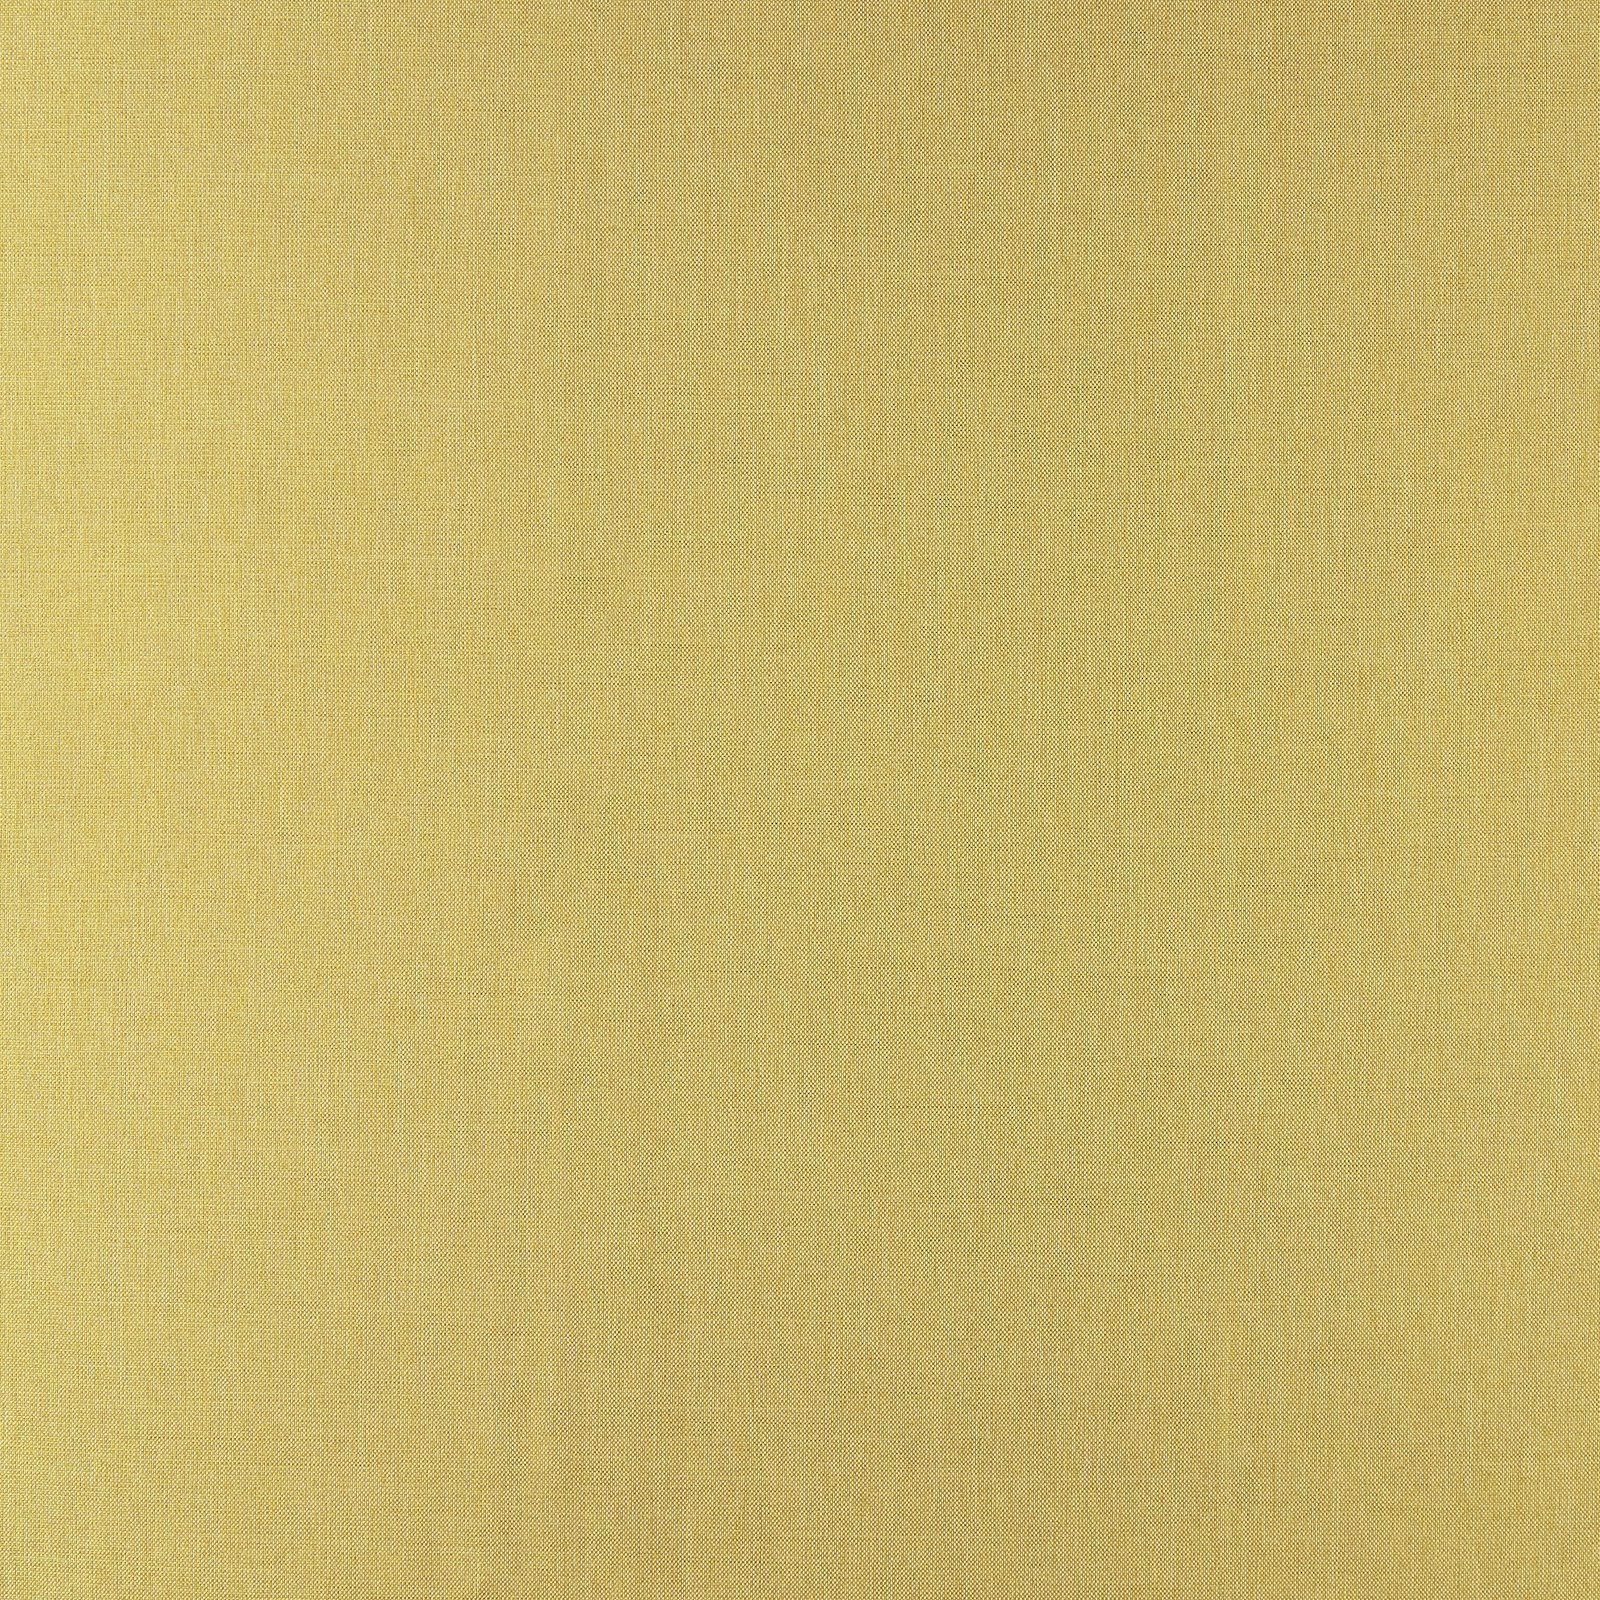 Upholstery fabric light olive yellow mel 826608_pack_solid